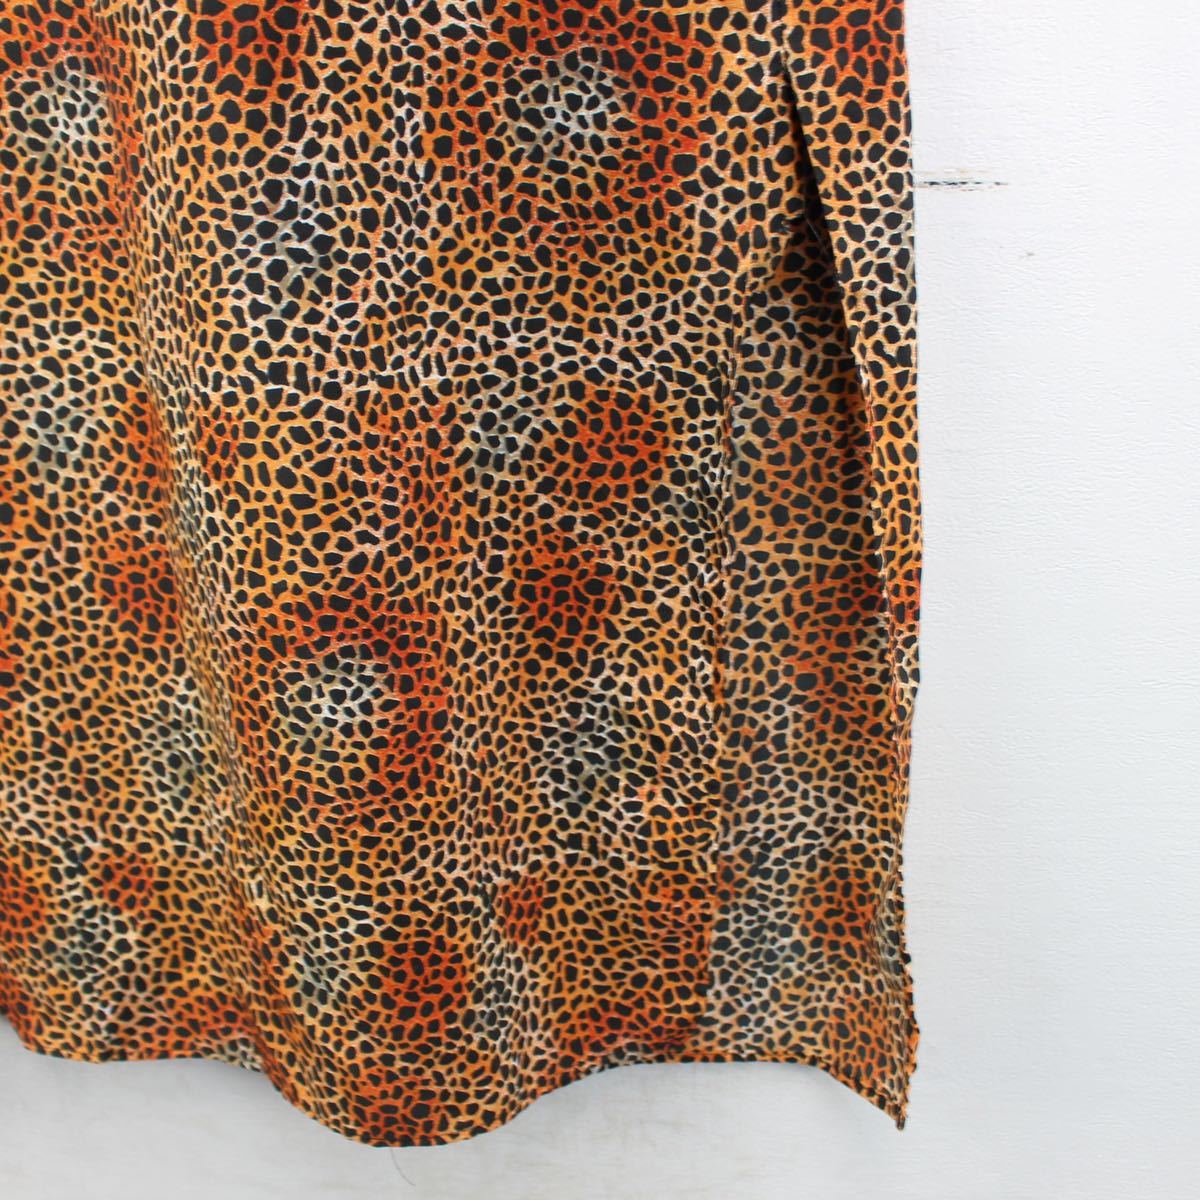 USA VINTAGE STYLE AMERICA LEOPARD PATTERNED NO SLEEVE ONE PIECE/アメリカ古着レオパード柄ノースリーブワンピース_画像8